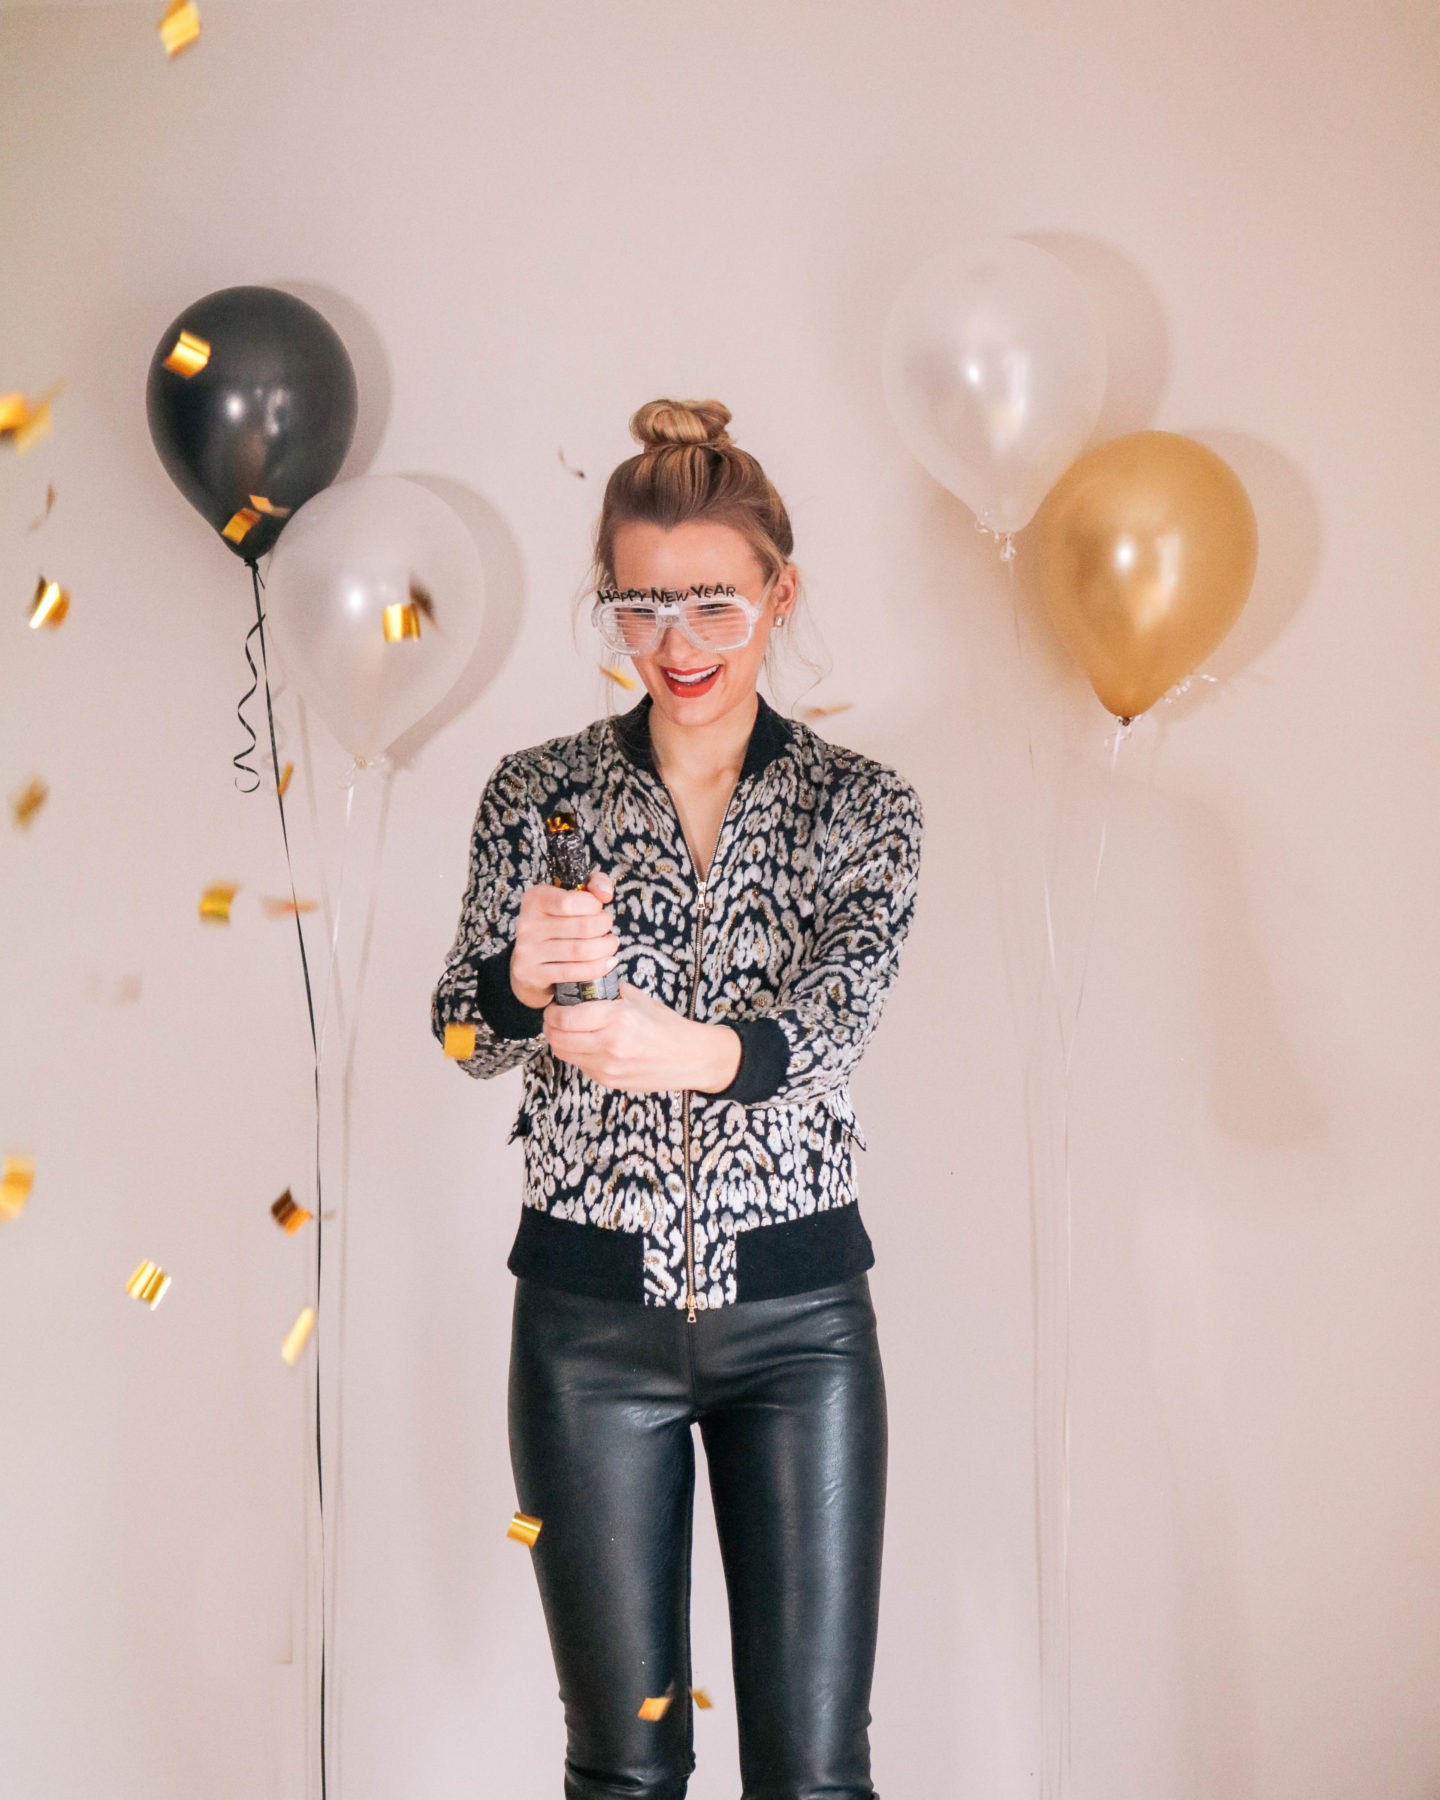 Fashion blogger, Leigha Gardner, of The Lilac Press sharing some designer looks for NYE including this velvet Adam Lippes bomber jacket and Stella McCartney faux leather leggings.